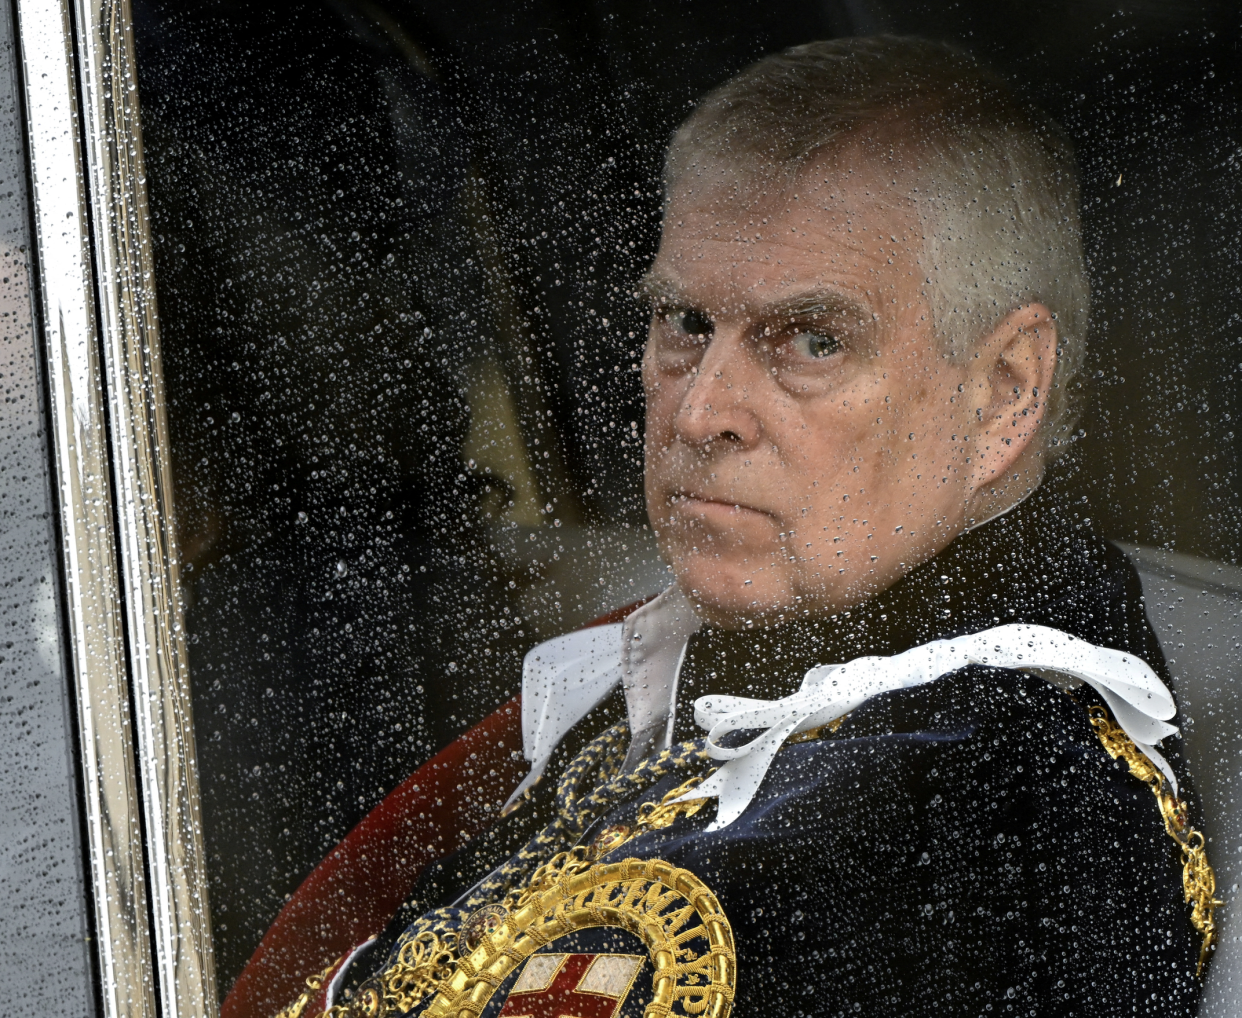 Prince Andrew seen through water-droplet covered window.